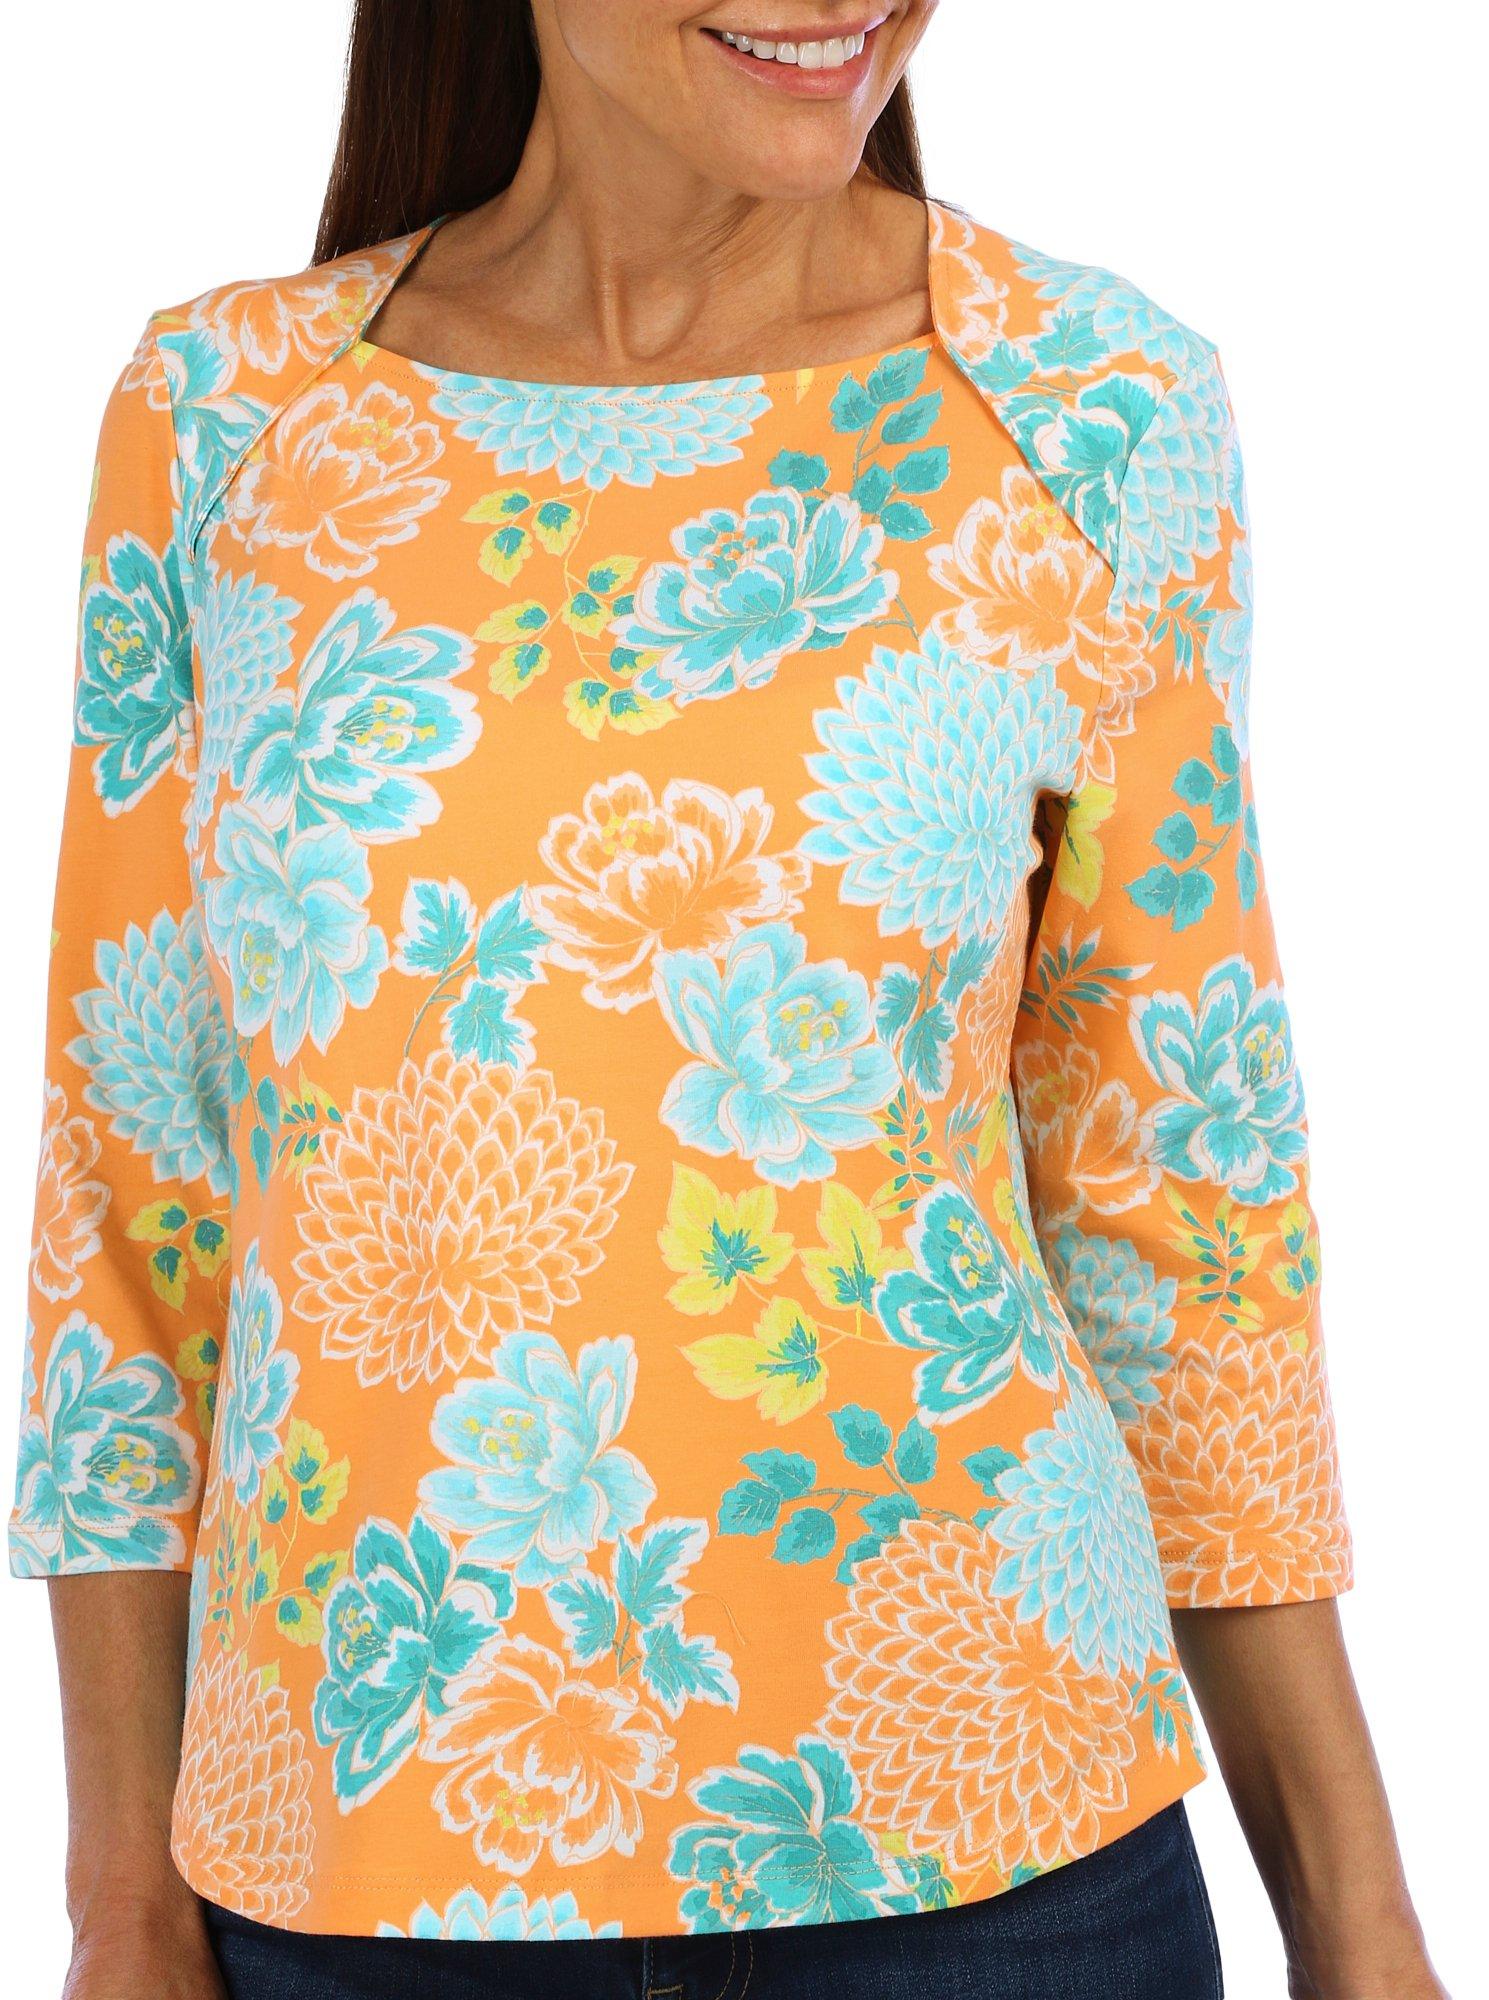 Ruby Road Petite Floral Square Neck 3/4 Sleeve Top